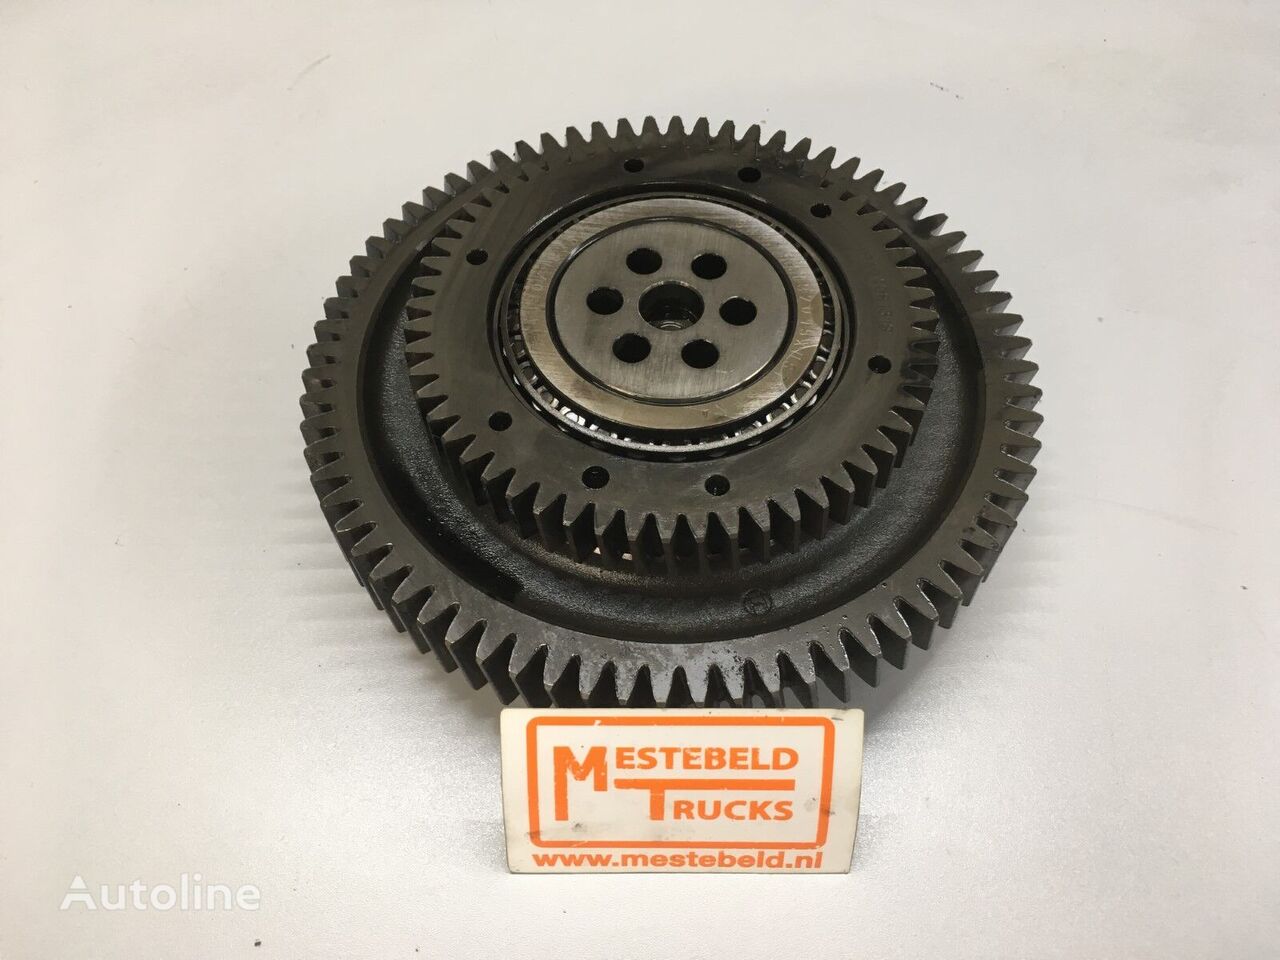 Renault DTI 11 460 EUVI EURO6 camshaft gear for truck